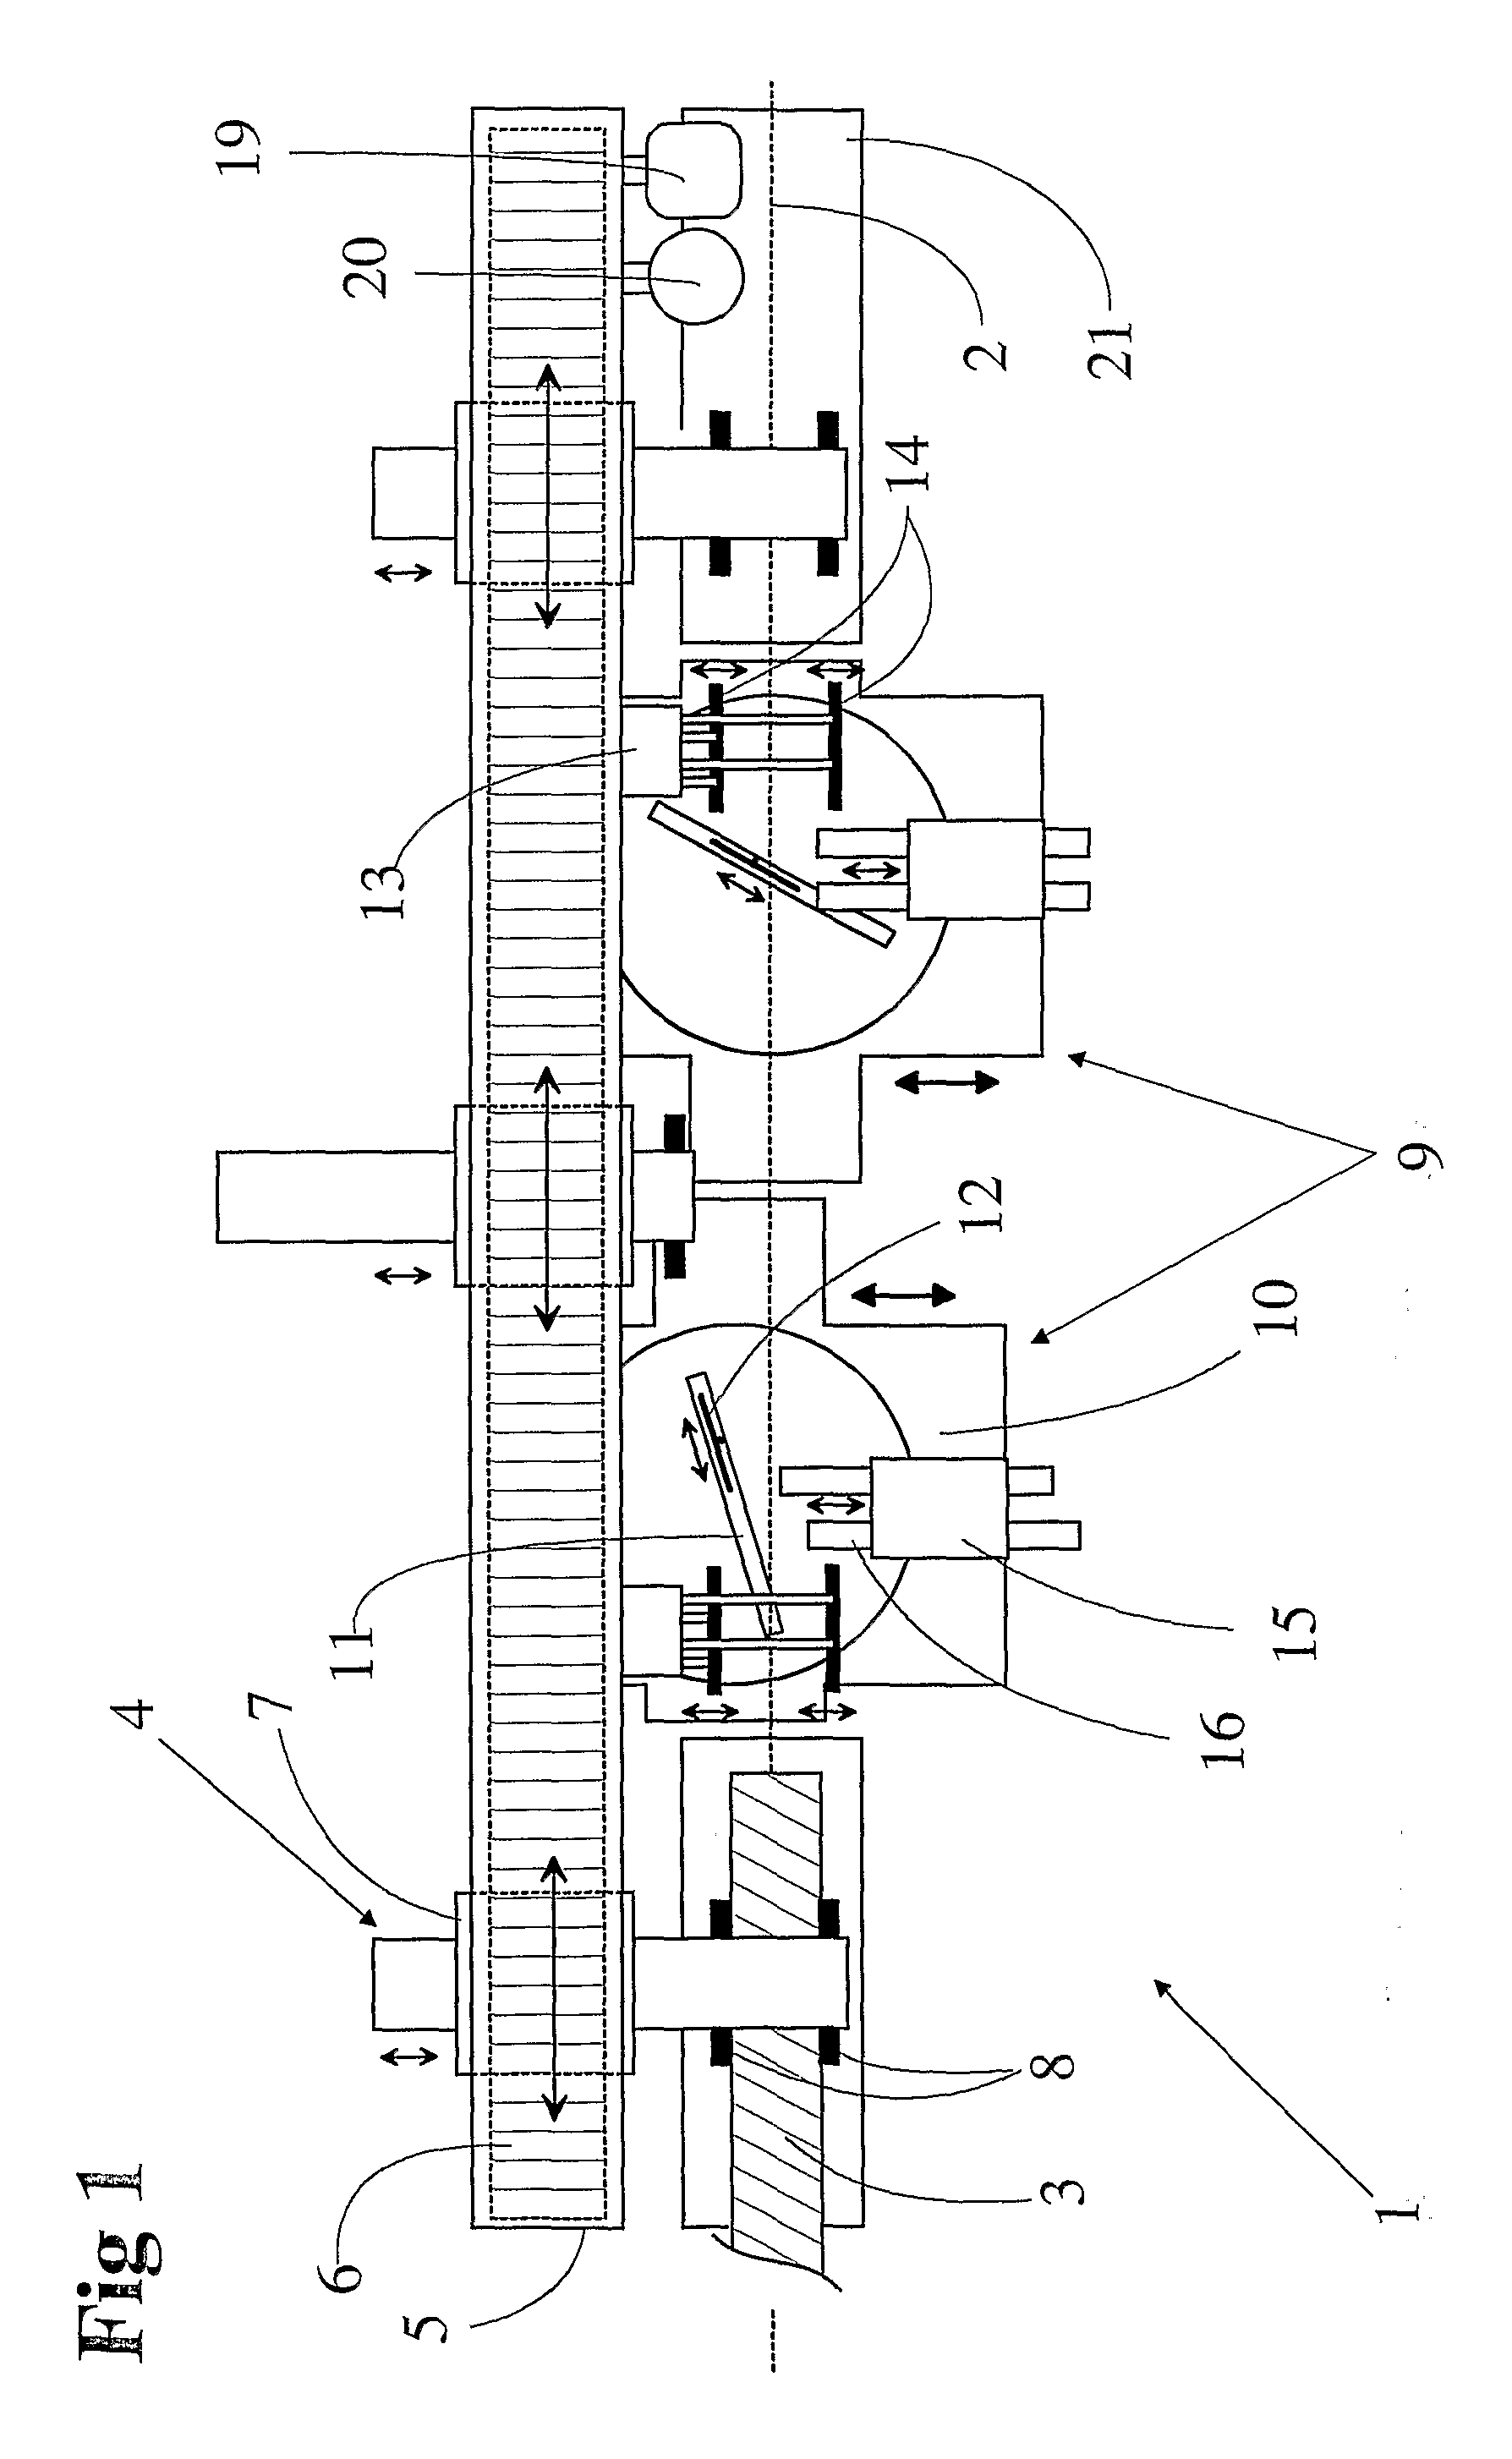 Sawing apparatus and method for using a sawing apparatus